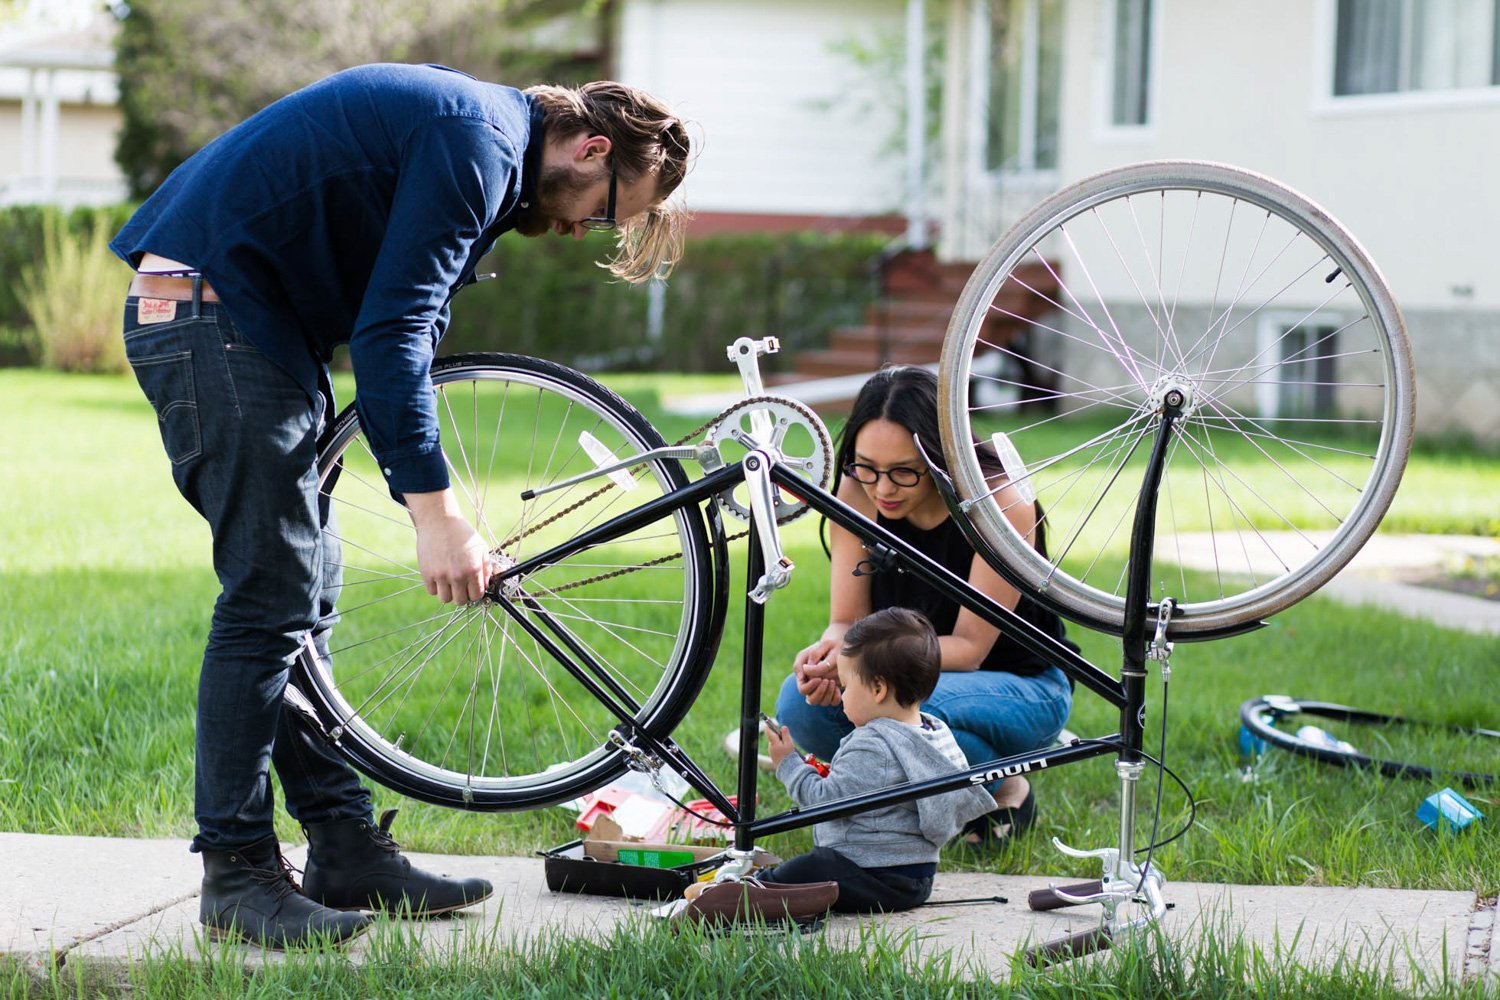  We’re not just giving this Linus a spring maintenance check, we’re fitting this bike with a baby seat. This is the moment, the moment where this new little family goes on their first bike ride together. Ilia and Denise Biziaev first connected over t